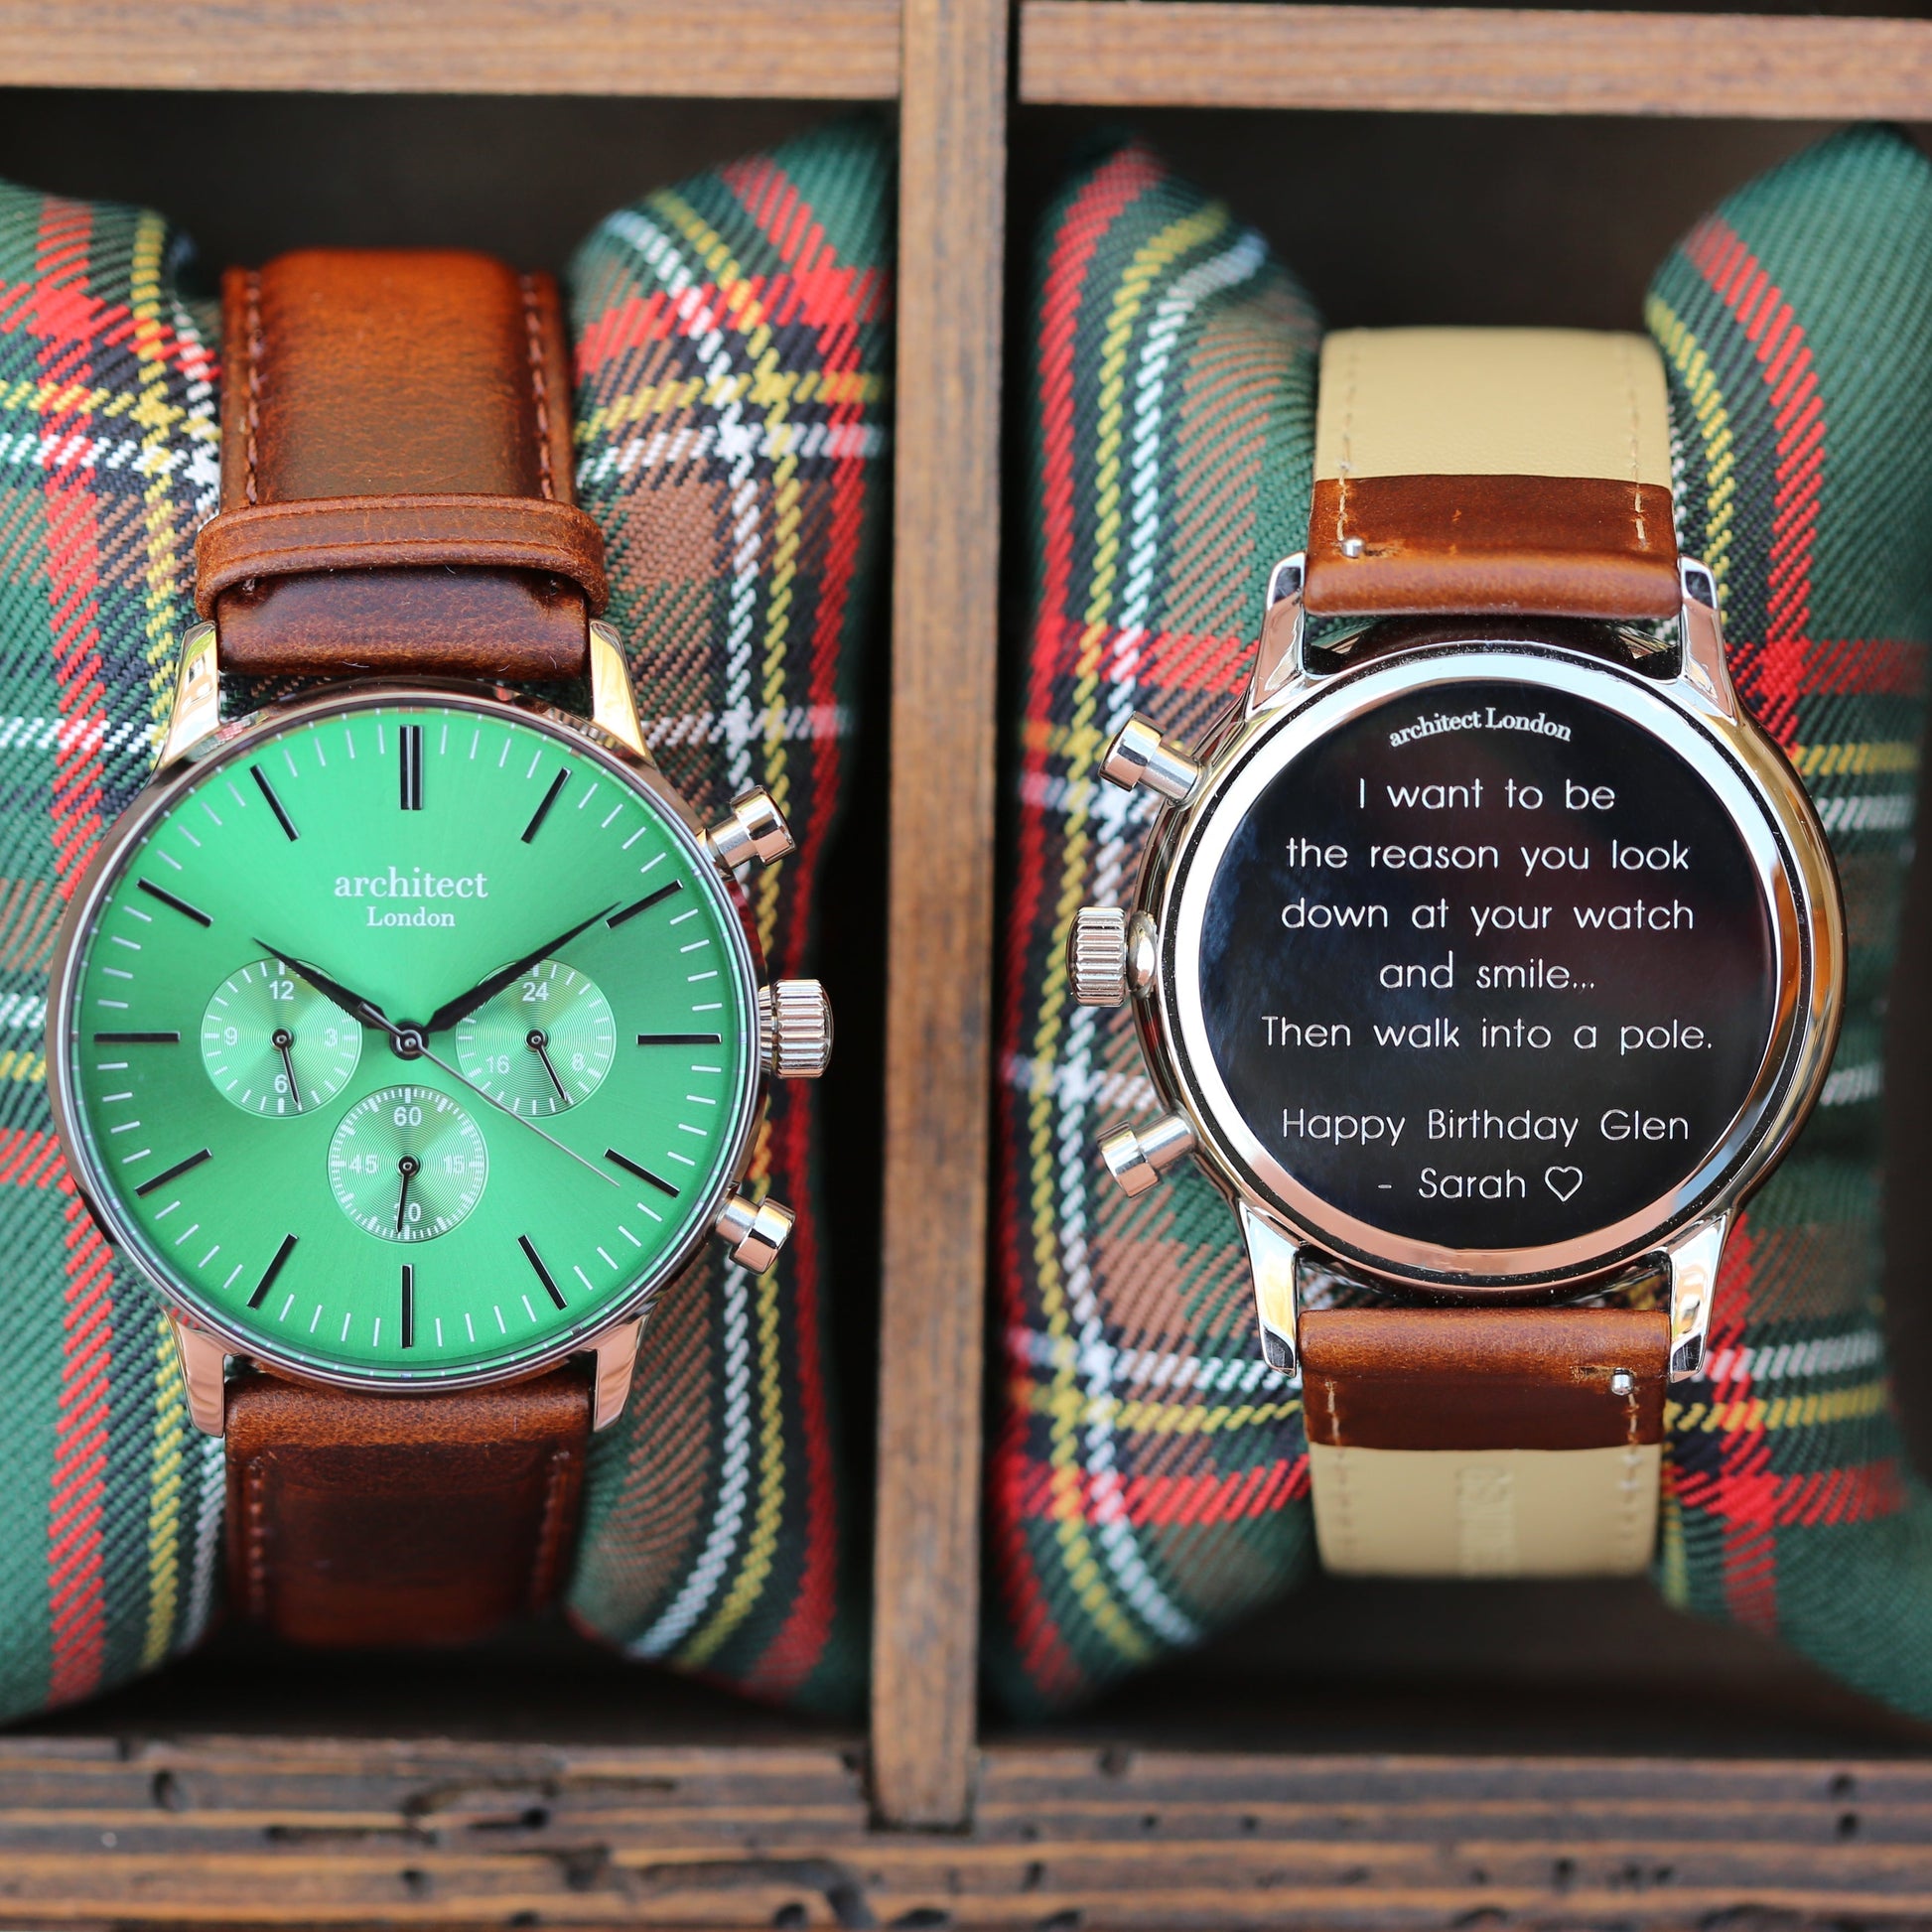 Personalized Men's Watches - Men's Architect Personalized Watch In Envy Green & Walnut 